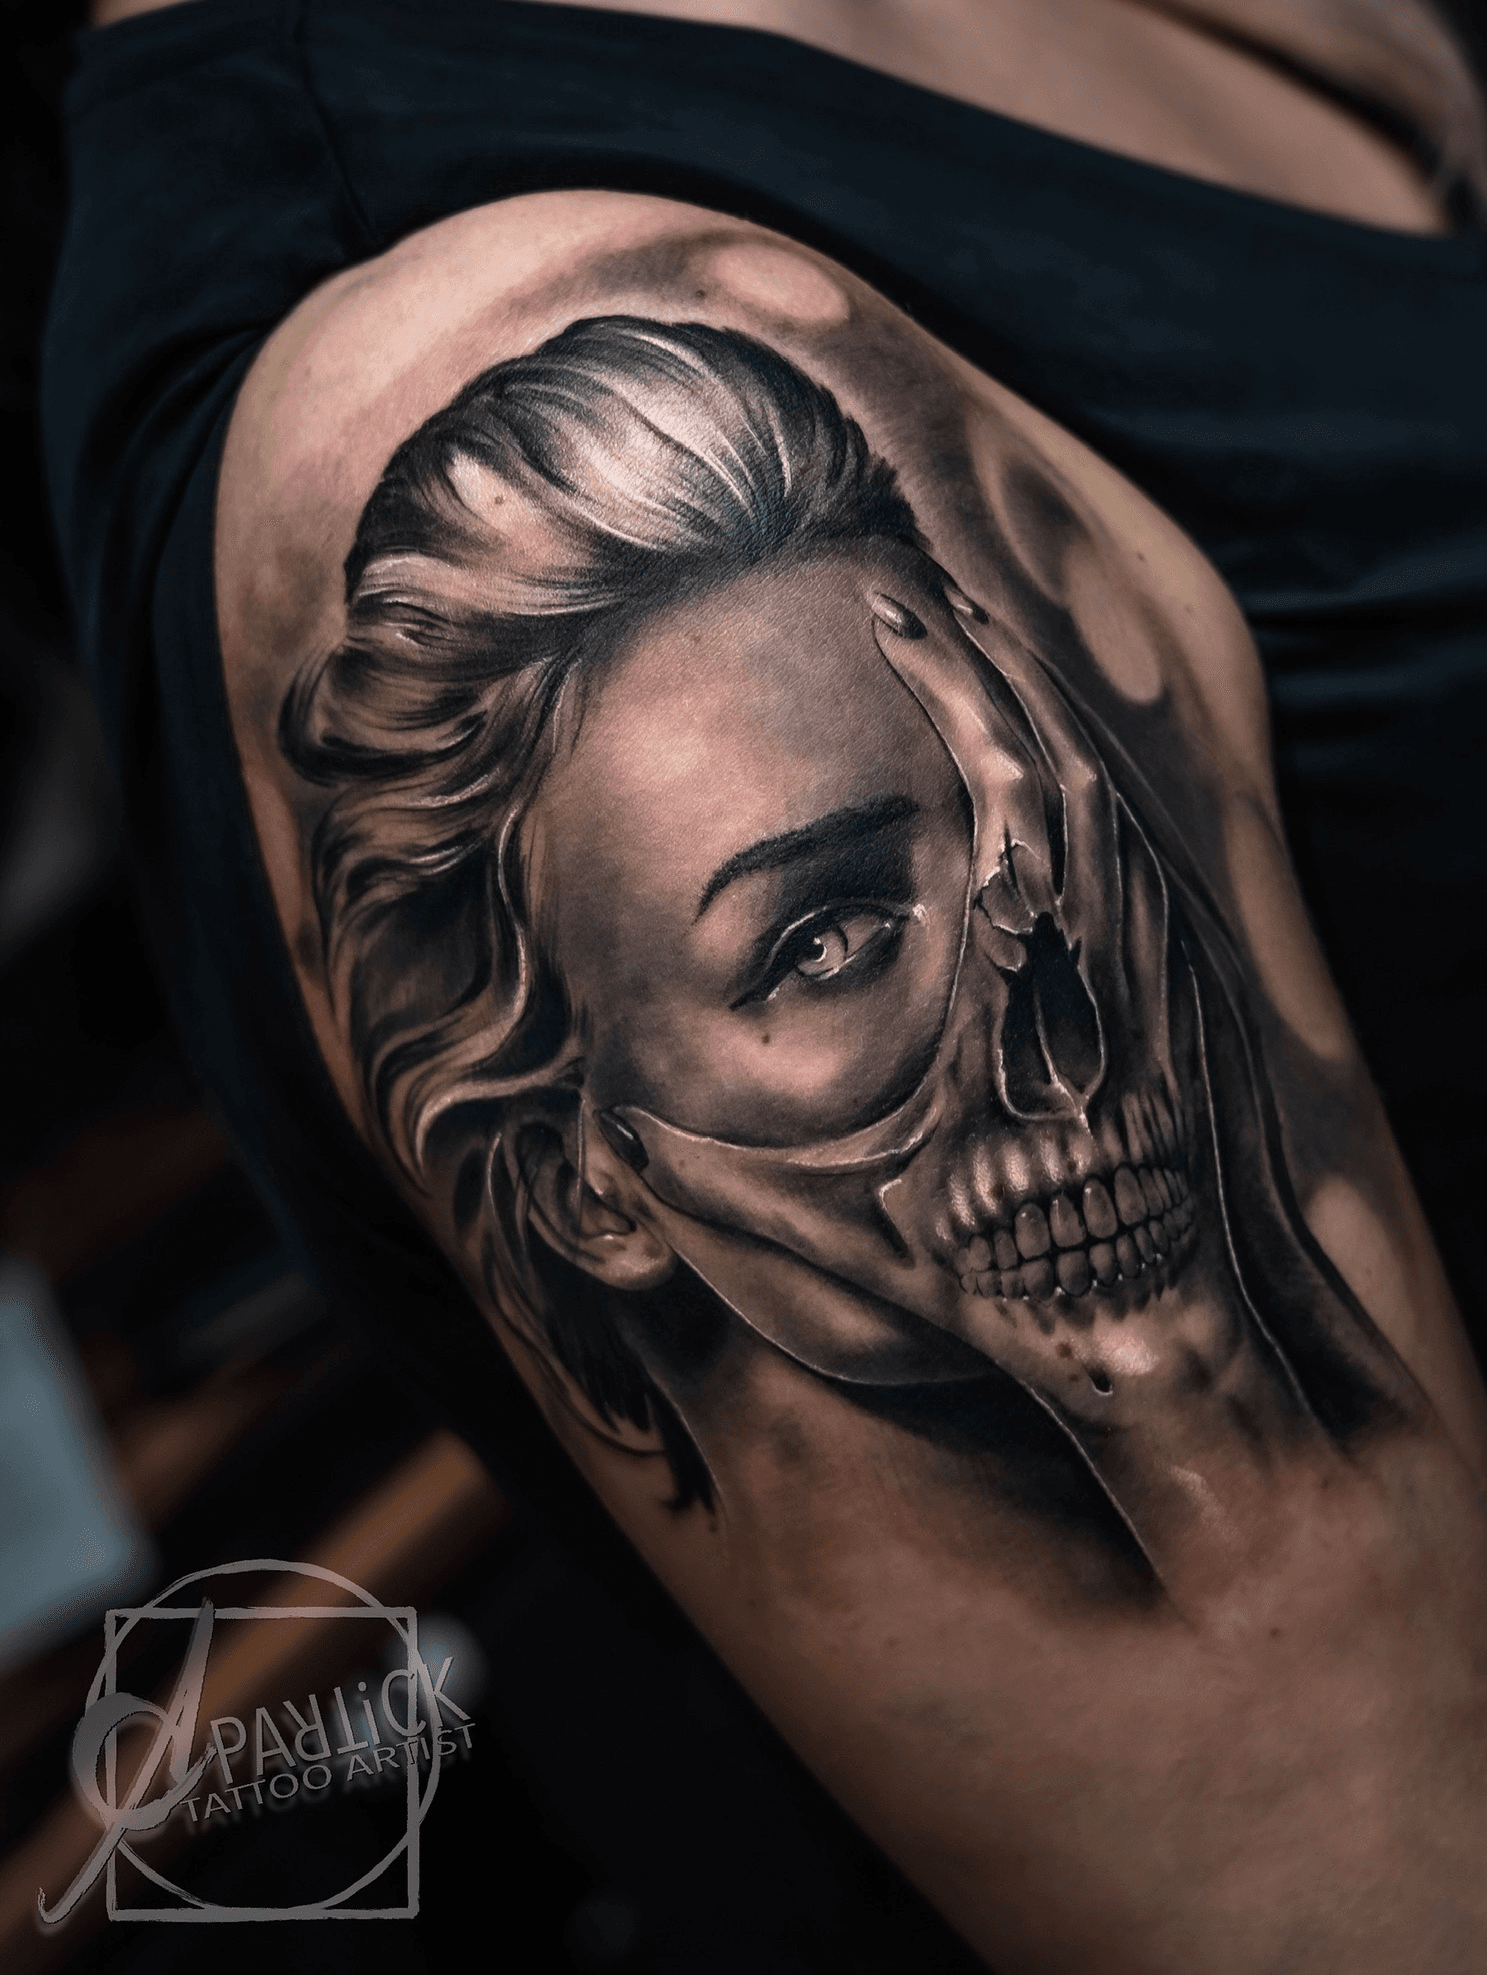 Source win 100 Cool Sexy Skull Tattoo Sticker Artificial Temporary Lasting  Arm Tattoo Sticker For MenWomen on malibabacom